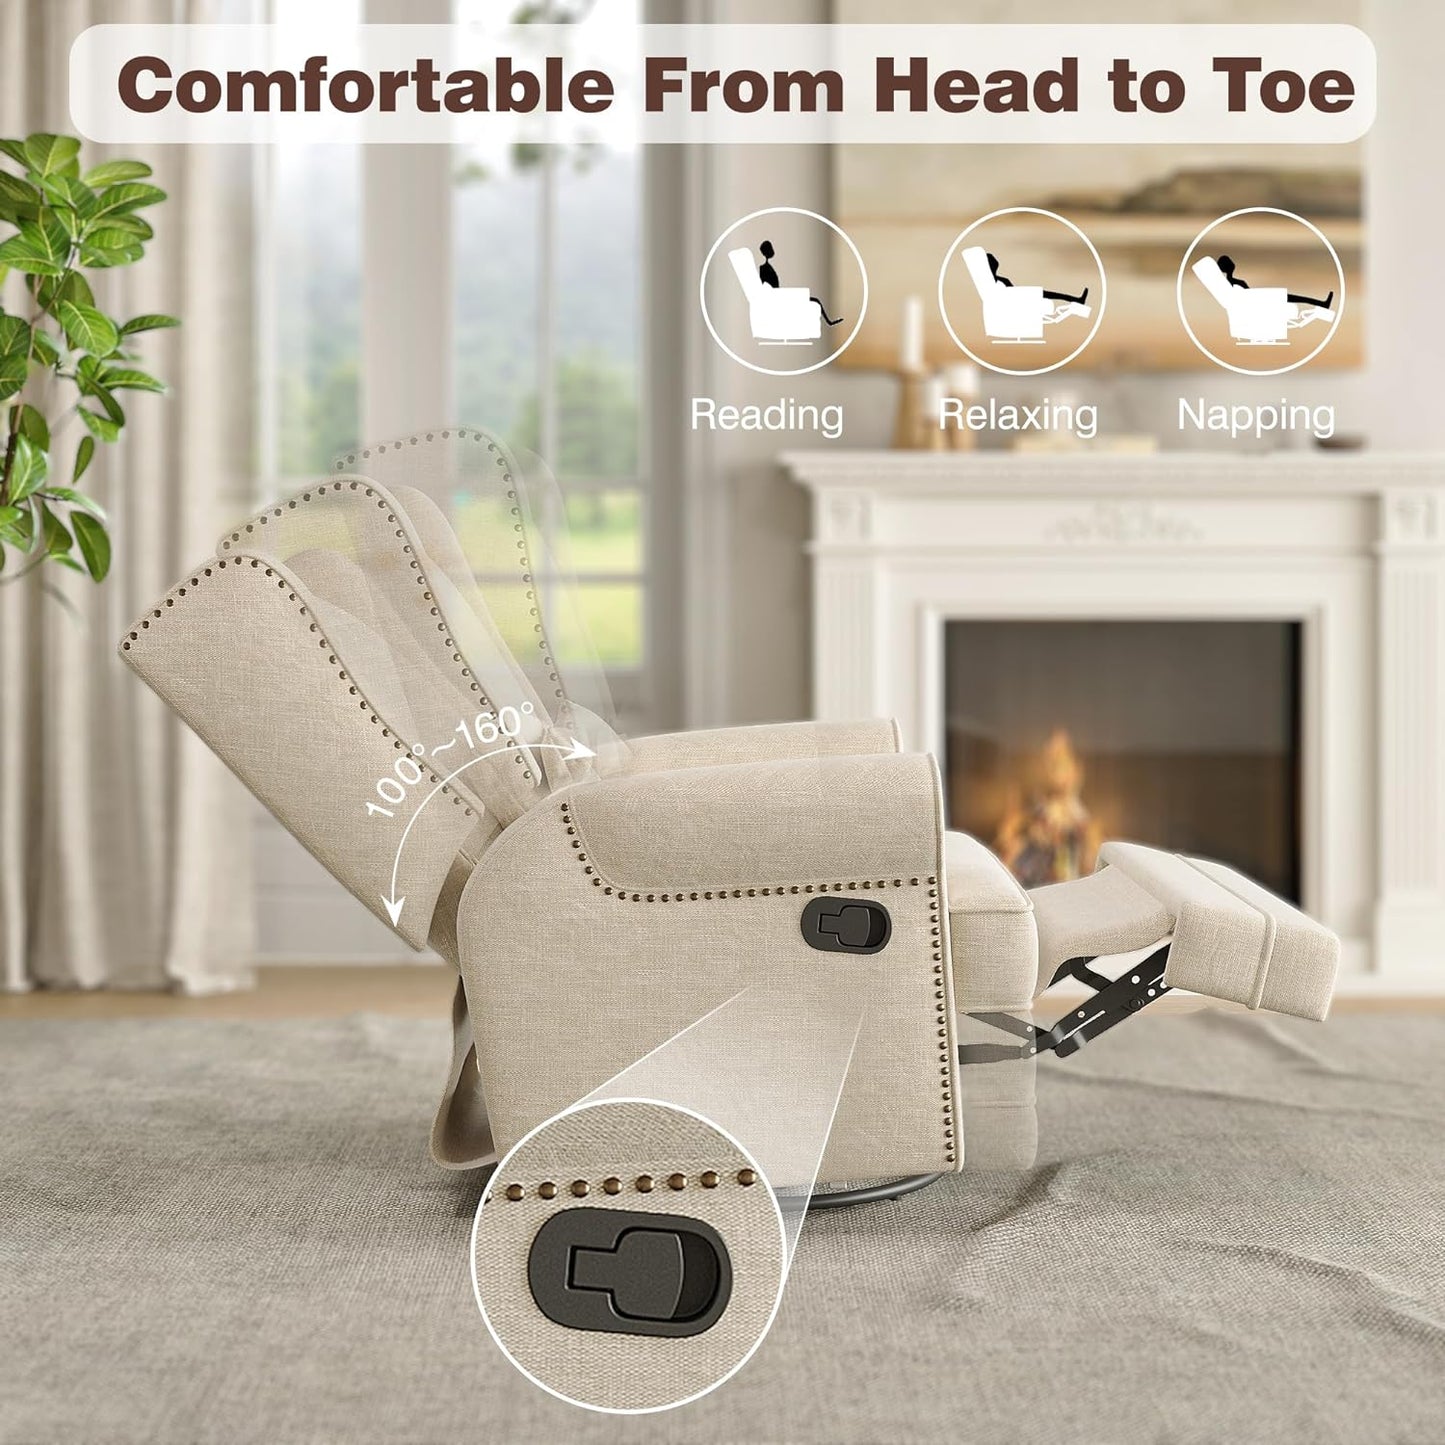 FansaFurn Recliner Comfy Upholstered Glider Lumbar Pillow and Footrest, Swivel Rocking Chair for Living Room, Beige